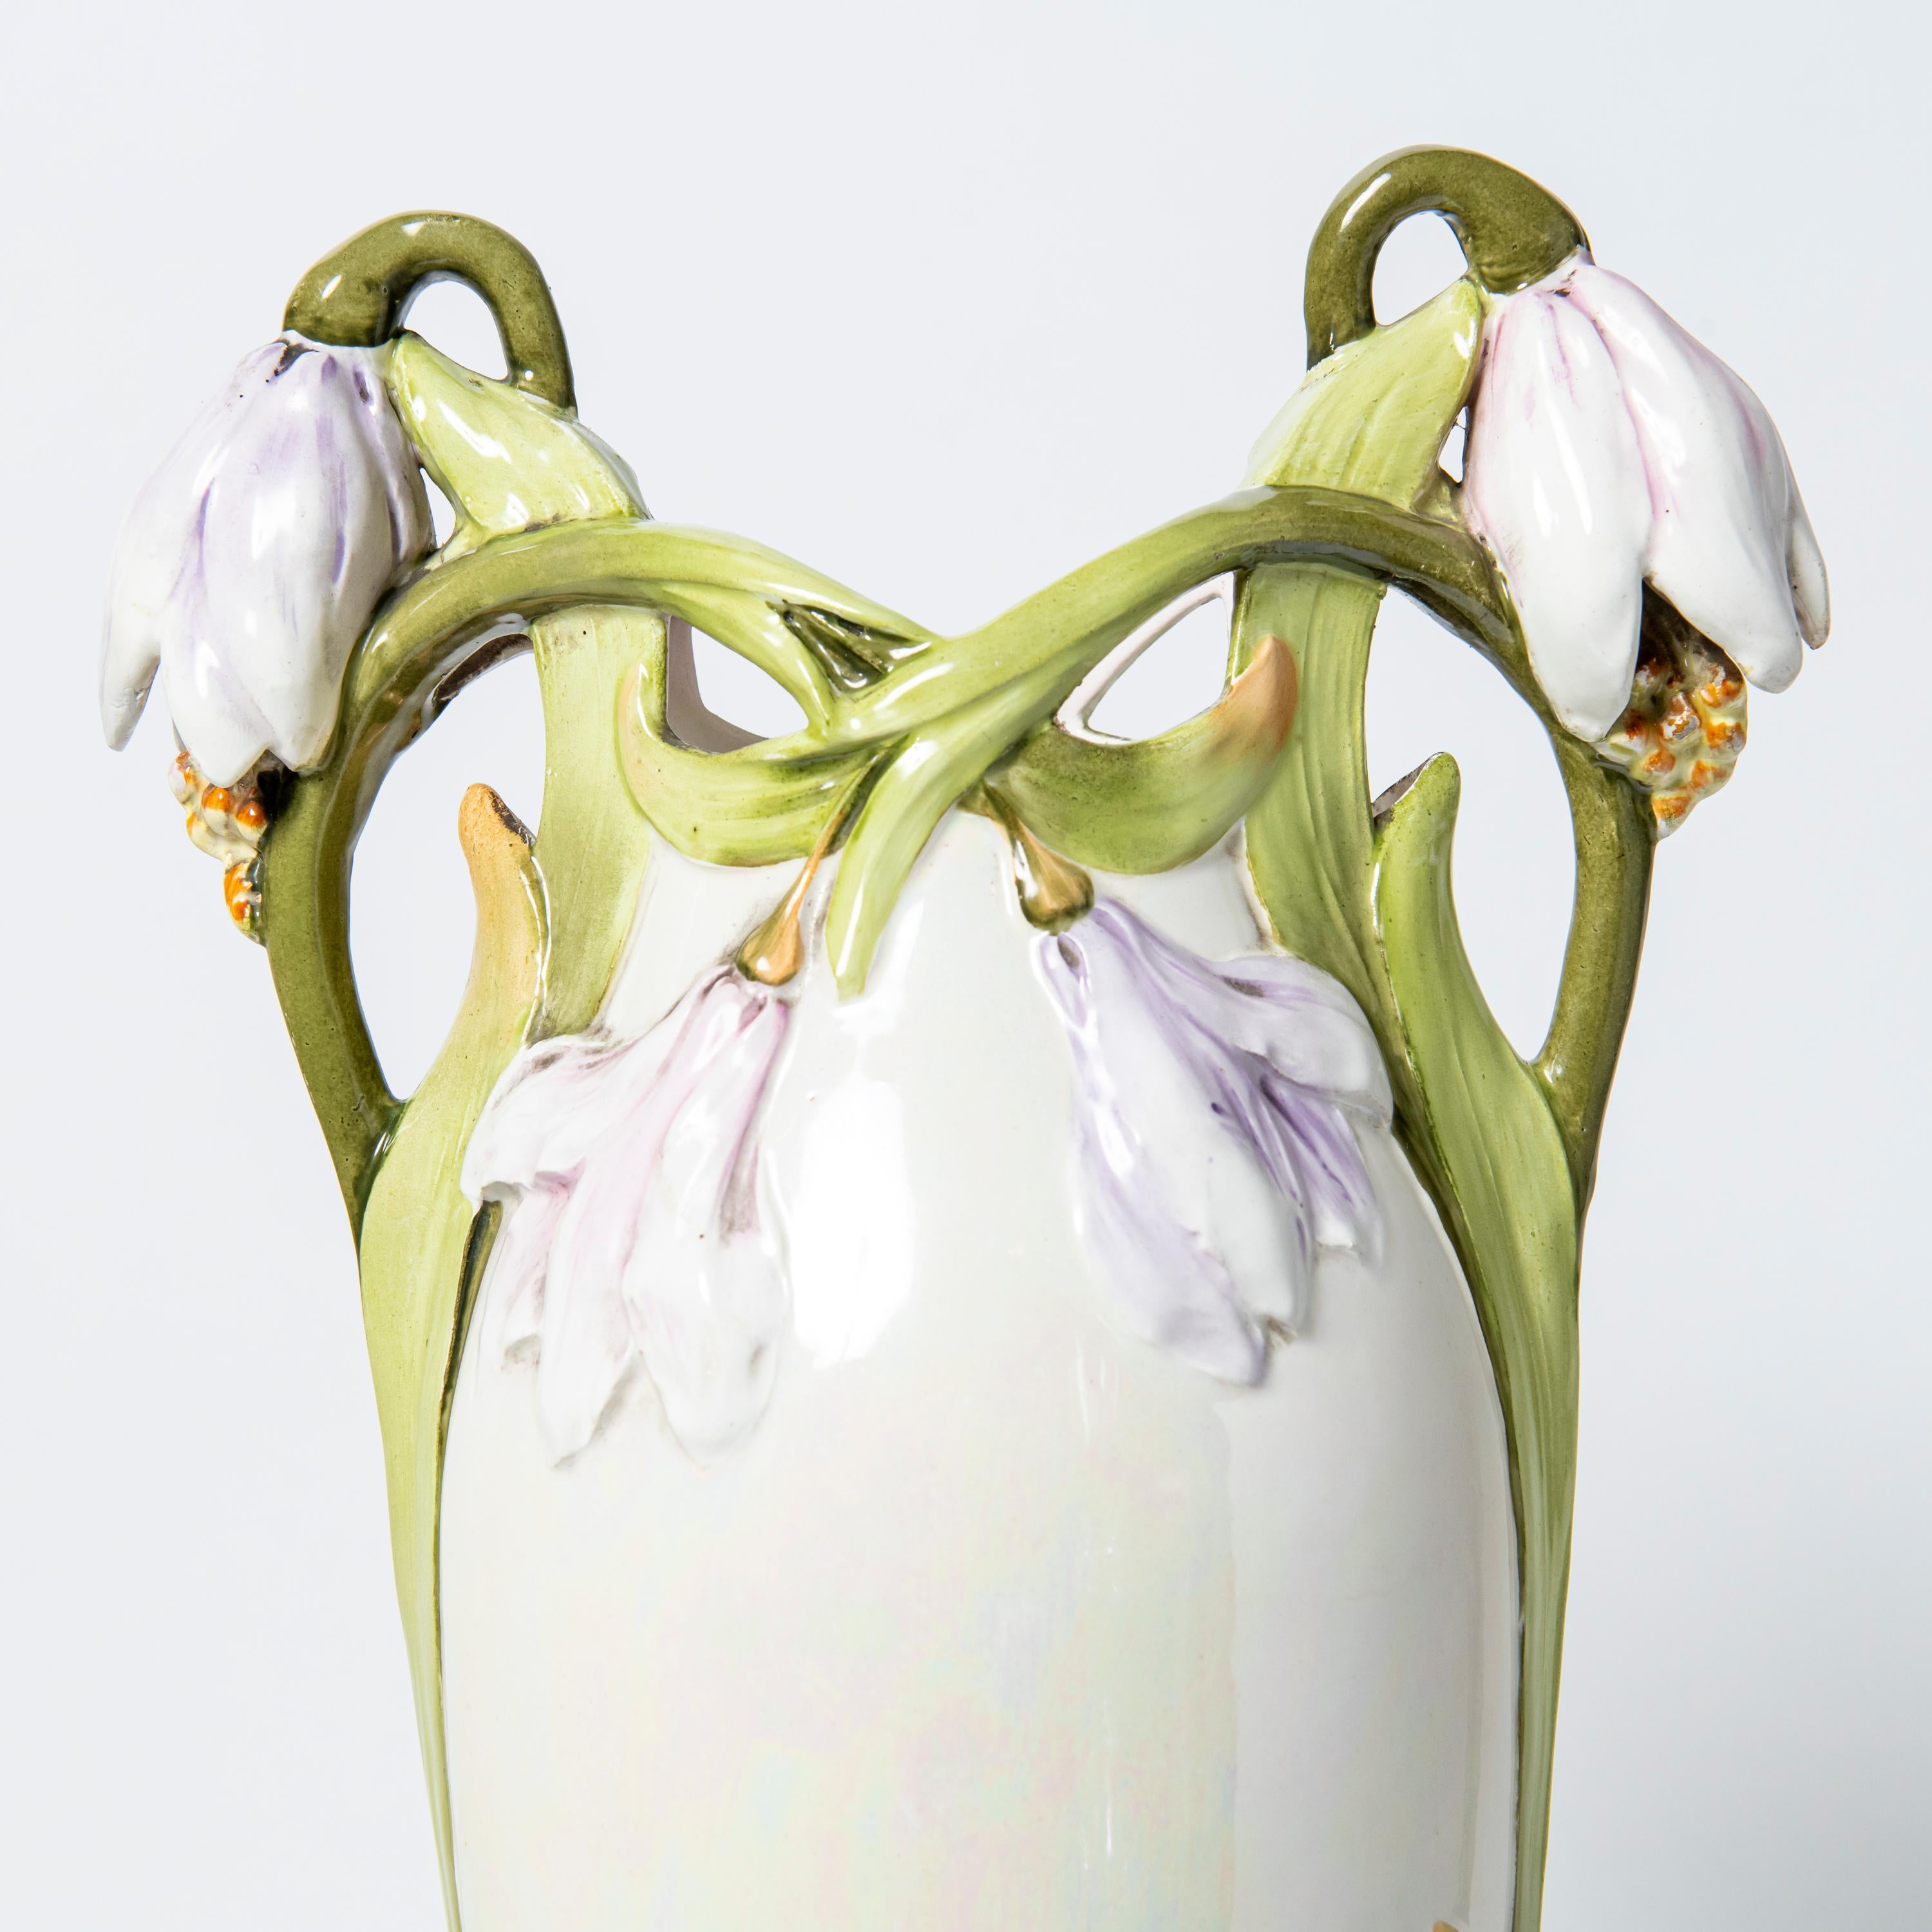  Glazed Ceramic vase, Art Nouveau Period, France, Early 20th Century. For Sale 1